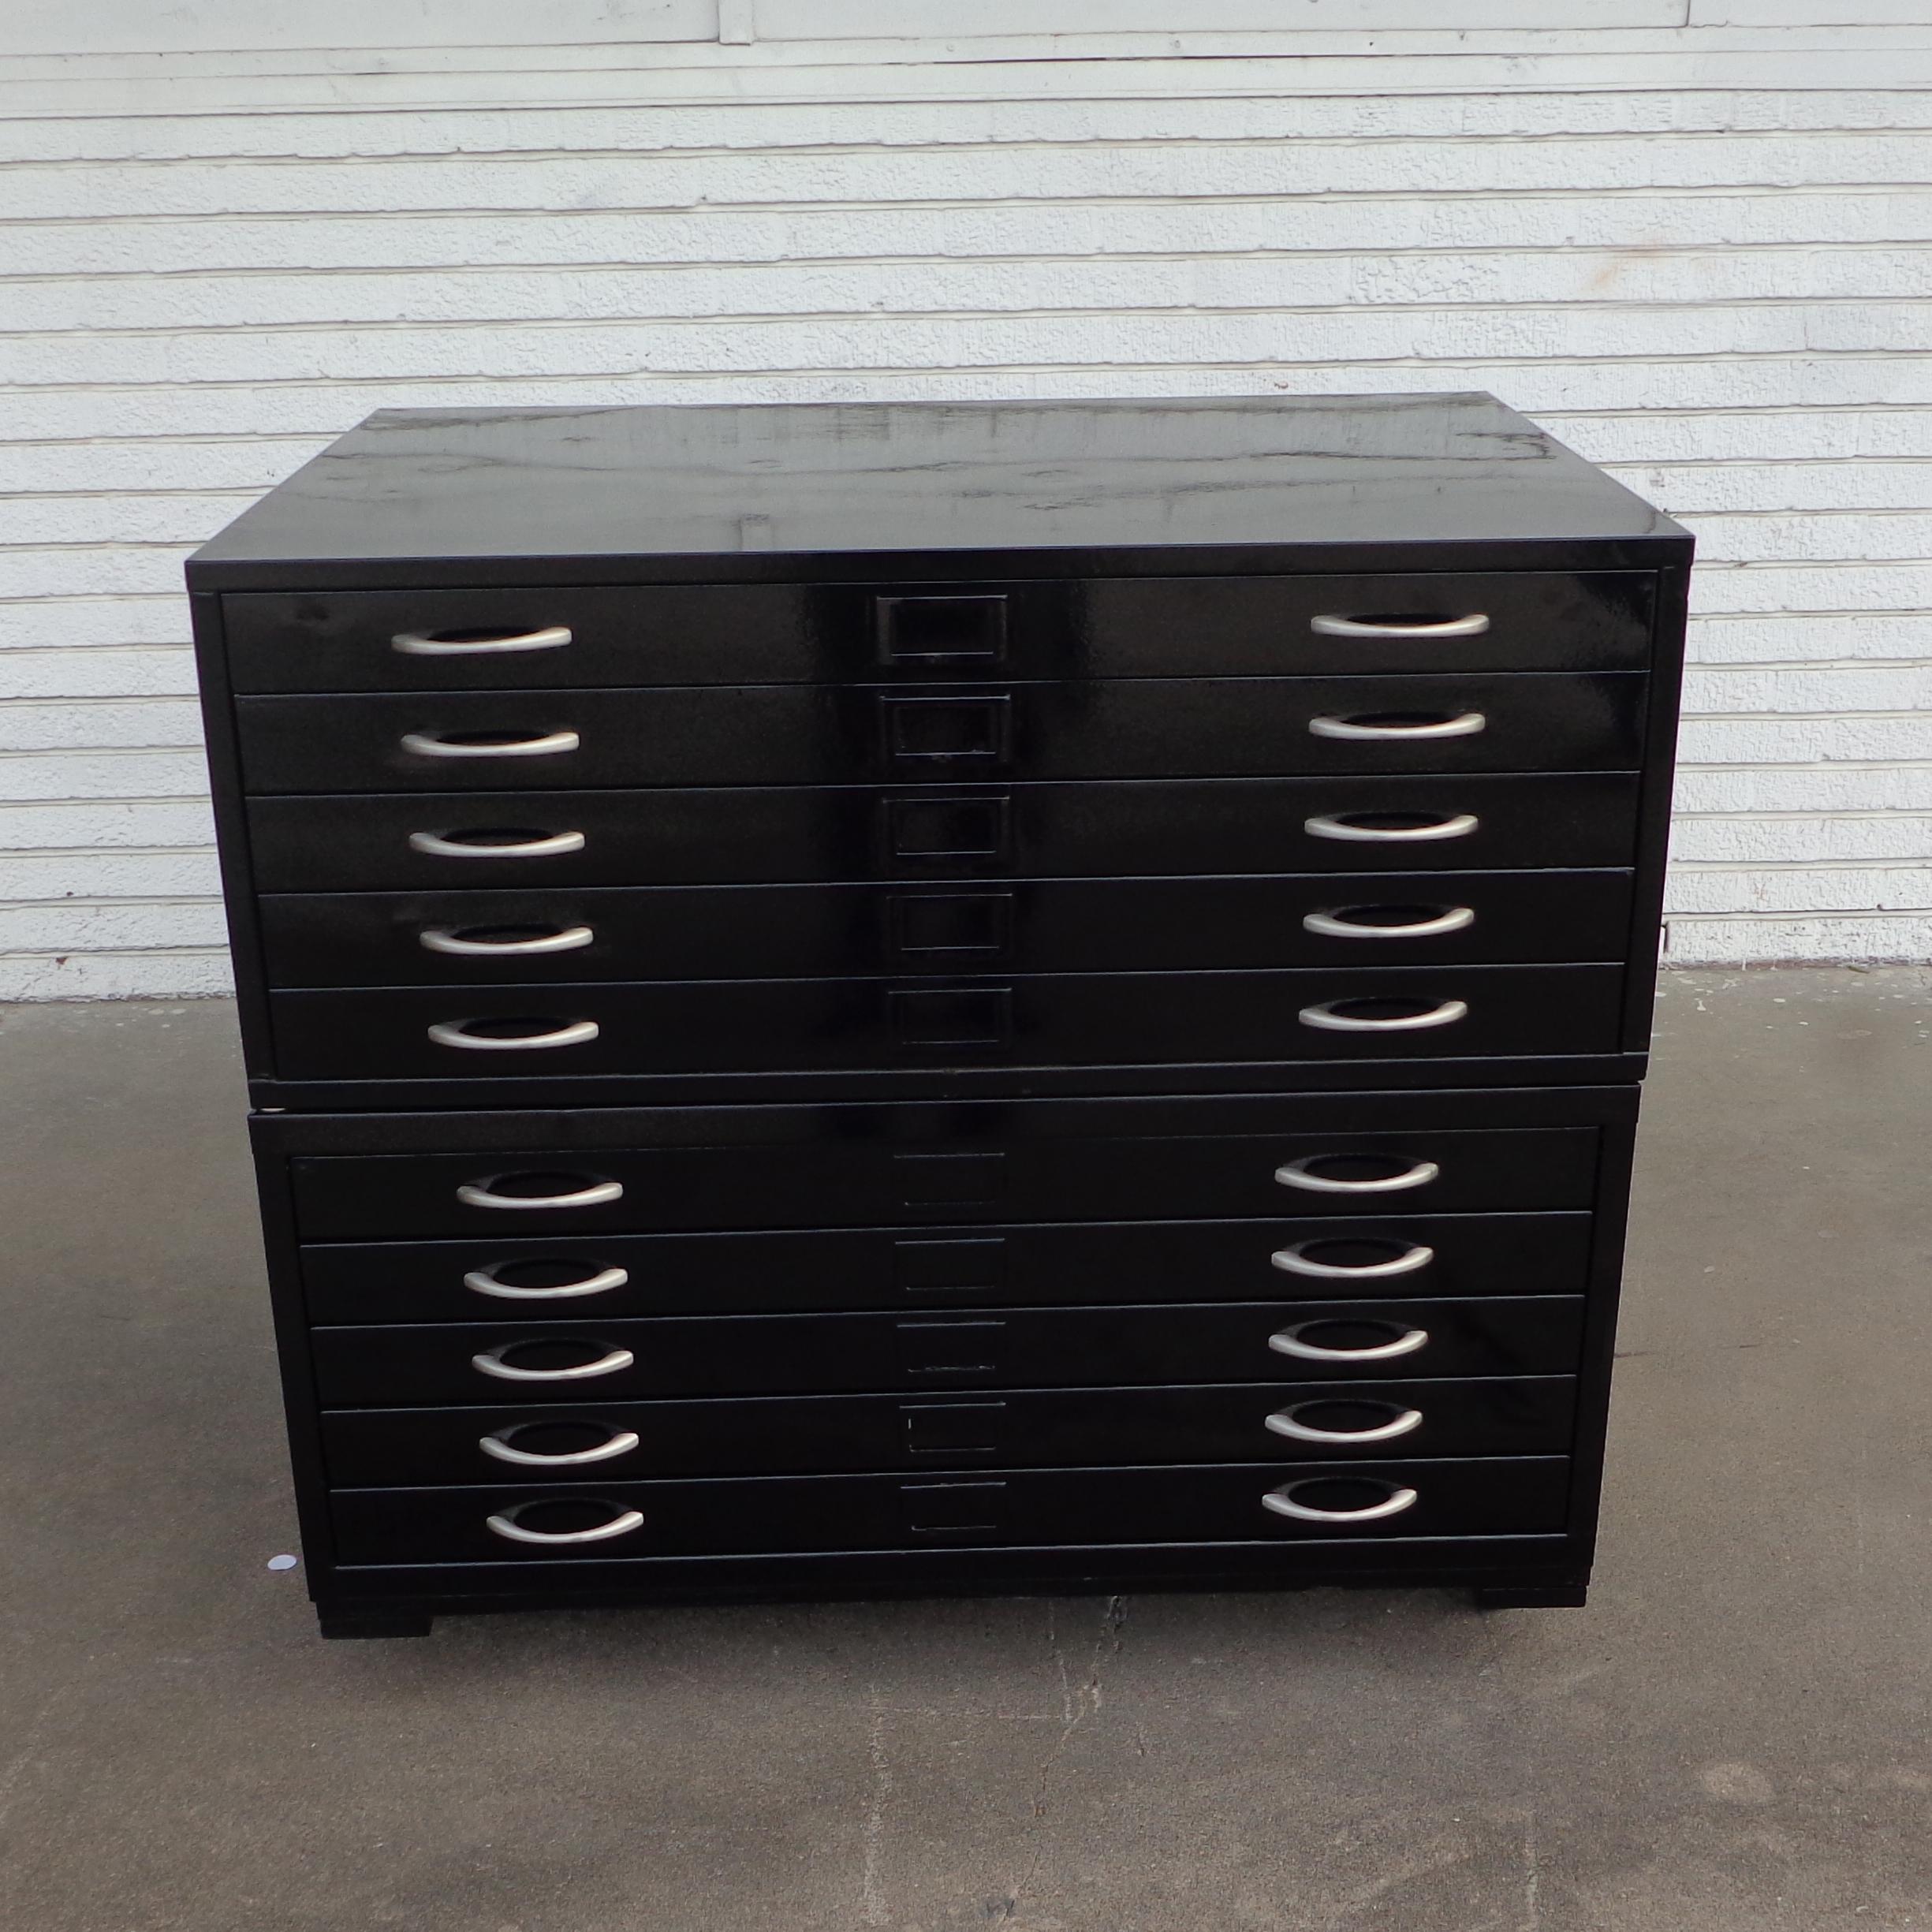 Vintage black architectural drafting flat file cabinets

Restored in a gloss black. 10 drawers with chrome pulls. 

Interal Dimensions:
Height 2 in. 
Width 37 1/4 in. 
Depth 26 in. 